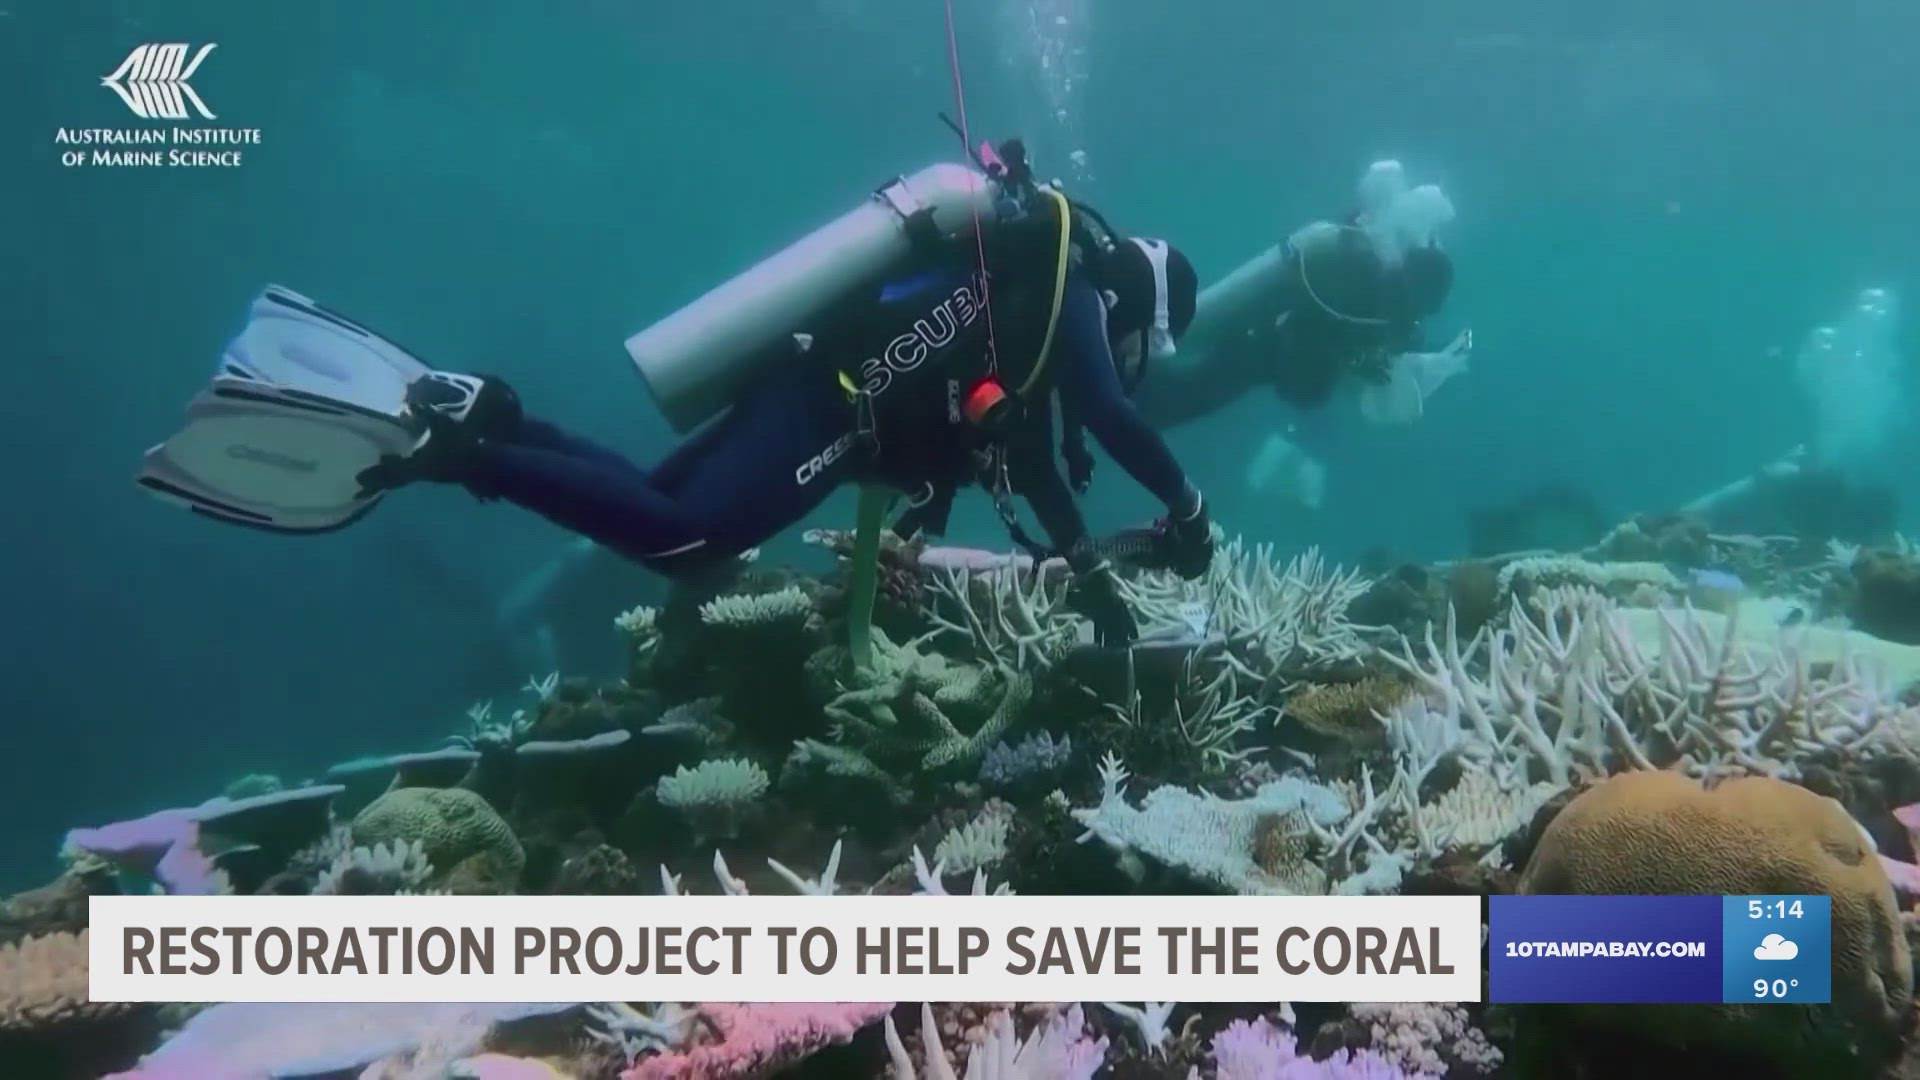 Mote Marine Laboratory said the project is the first step in bringing the coral reef back to health.